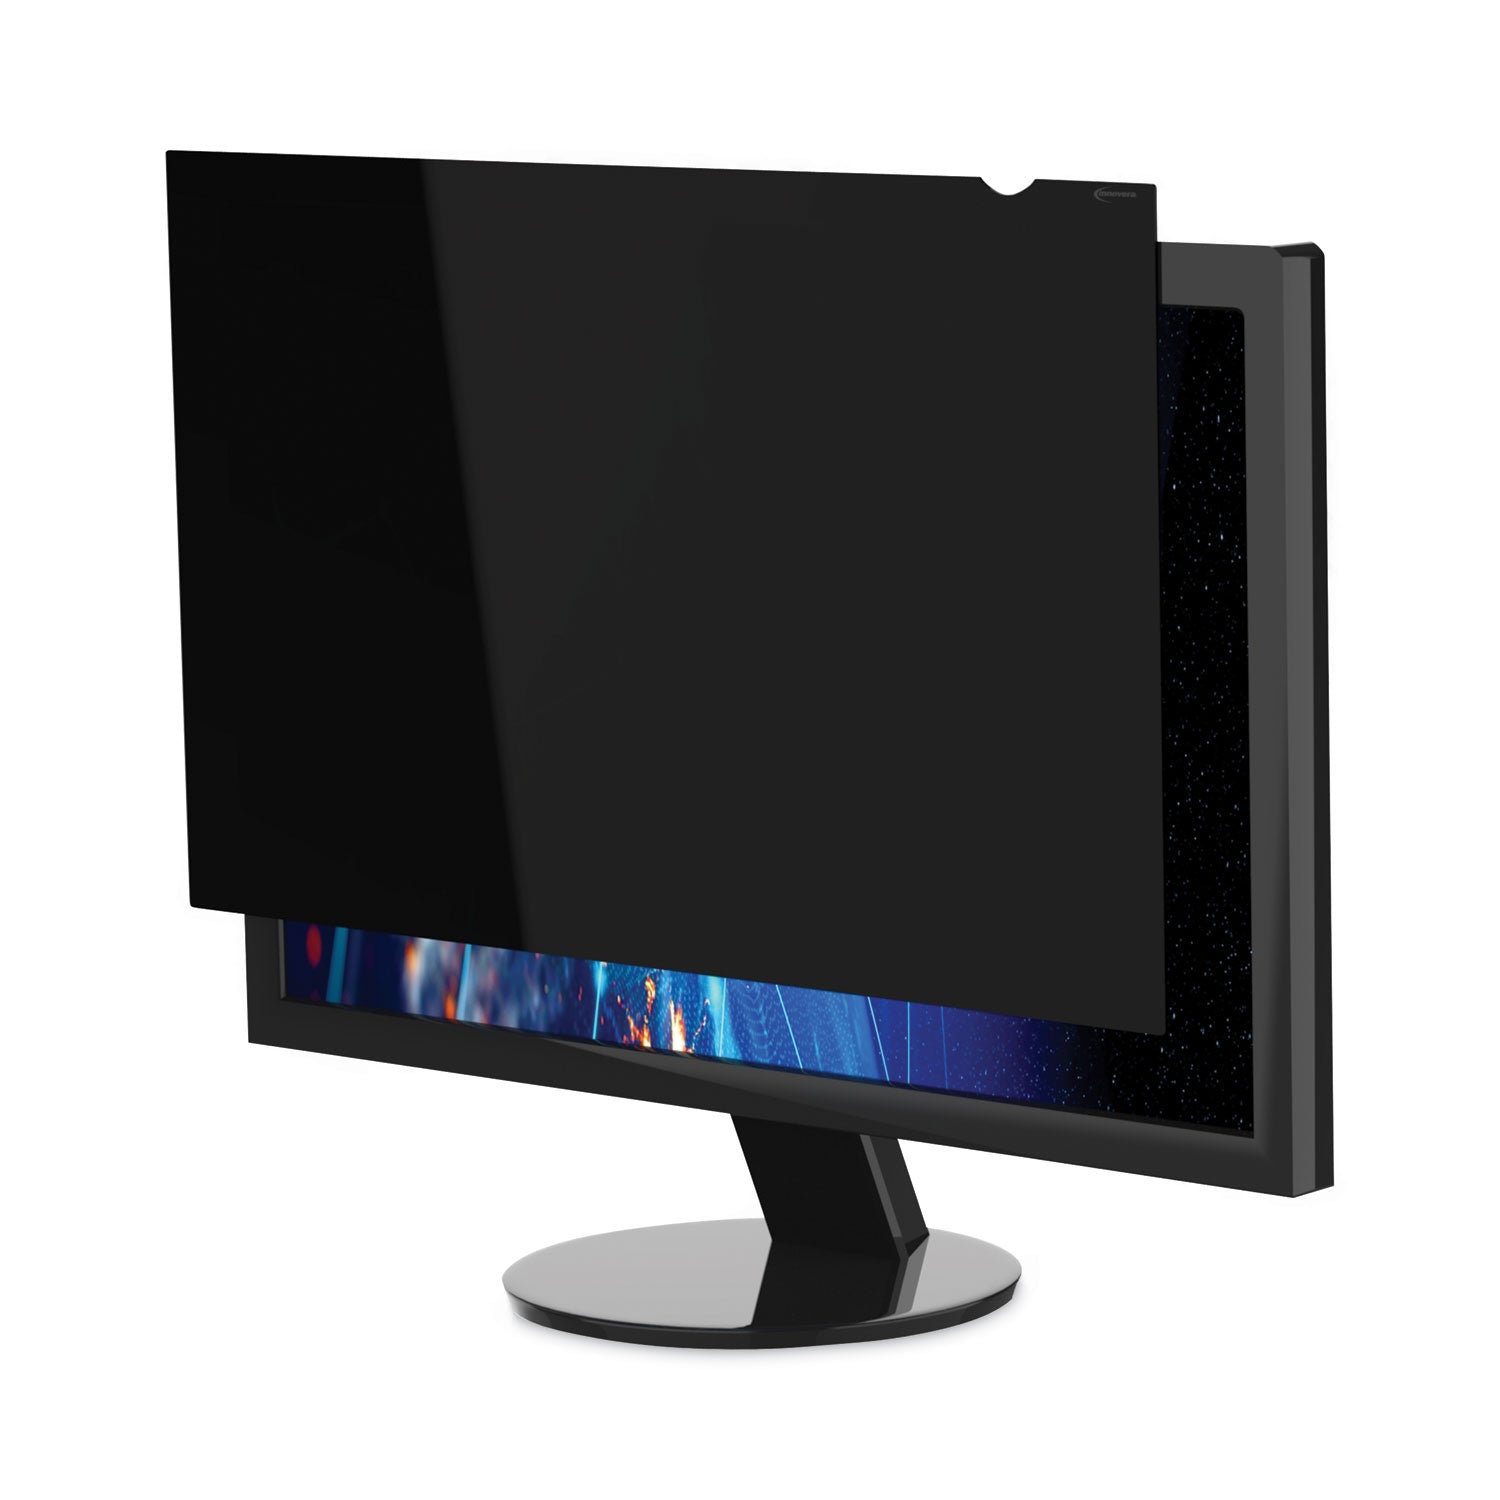 blackout-privacy-filter-for-27-widescreen-flat-panel-monitor-169-aspect-ratio_ivrblf27w - 3